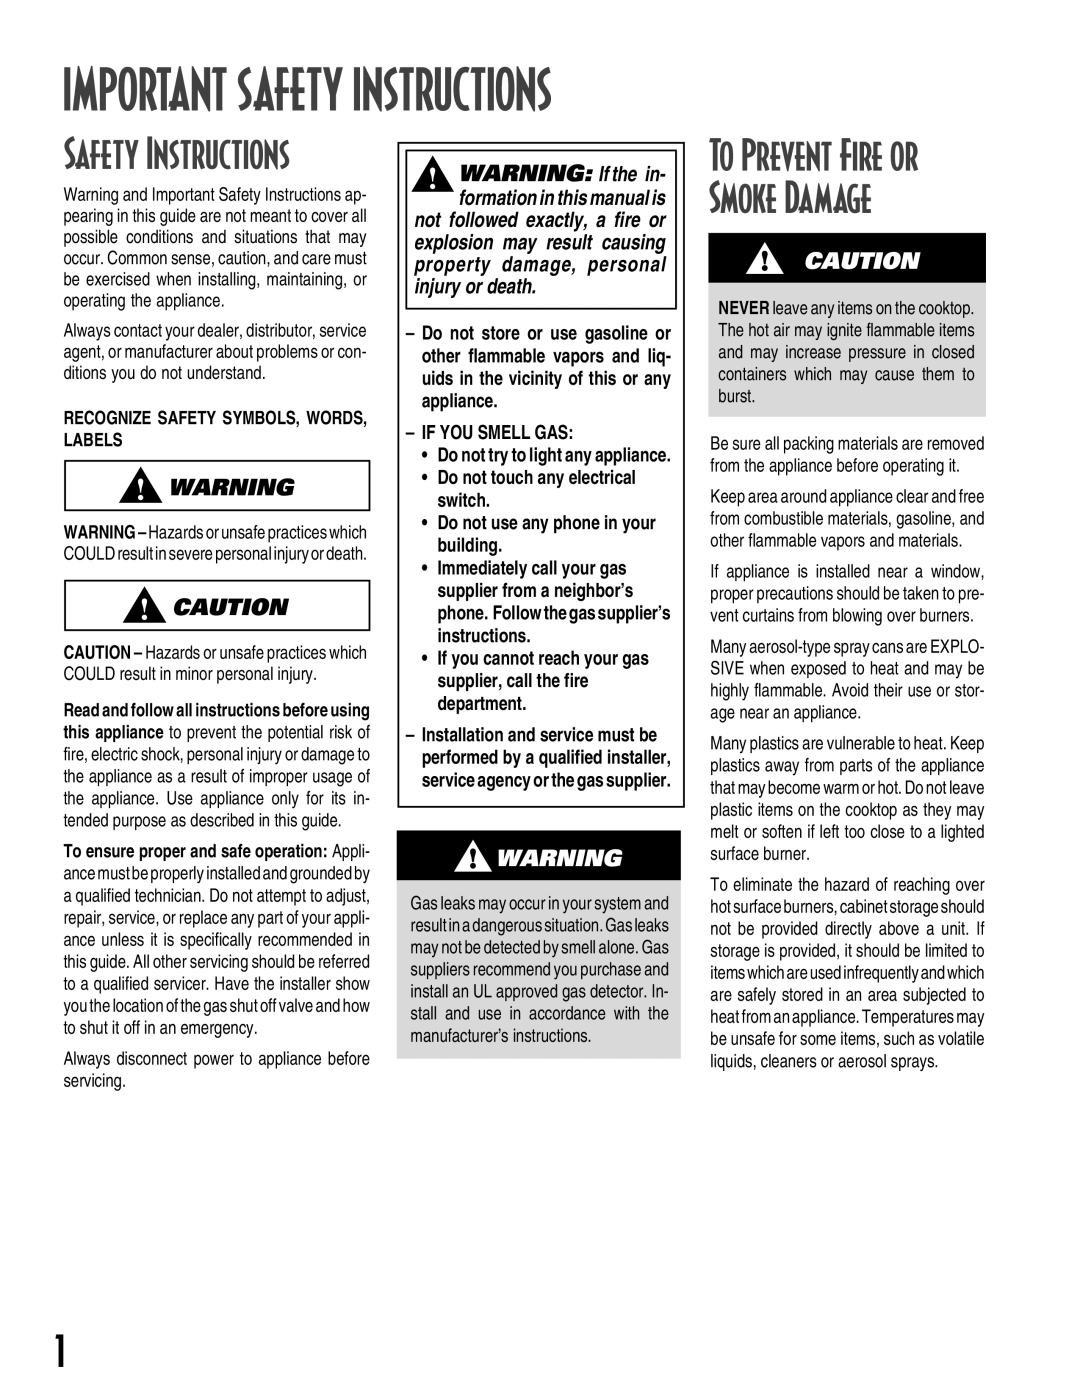 Maytag MGC5430 warranty Important Safety Instructions, To Prevent Fire or Smoke Damage, If You Smell Gas 